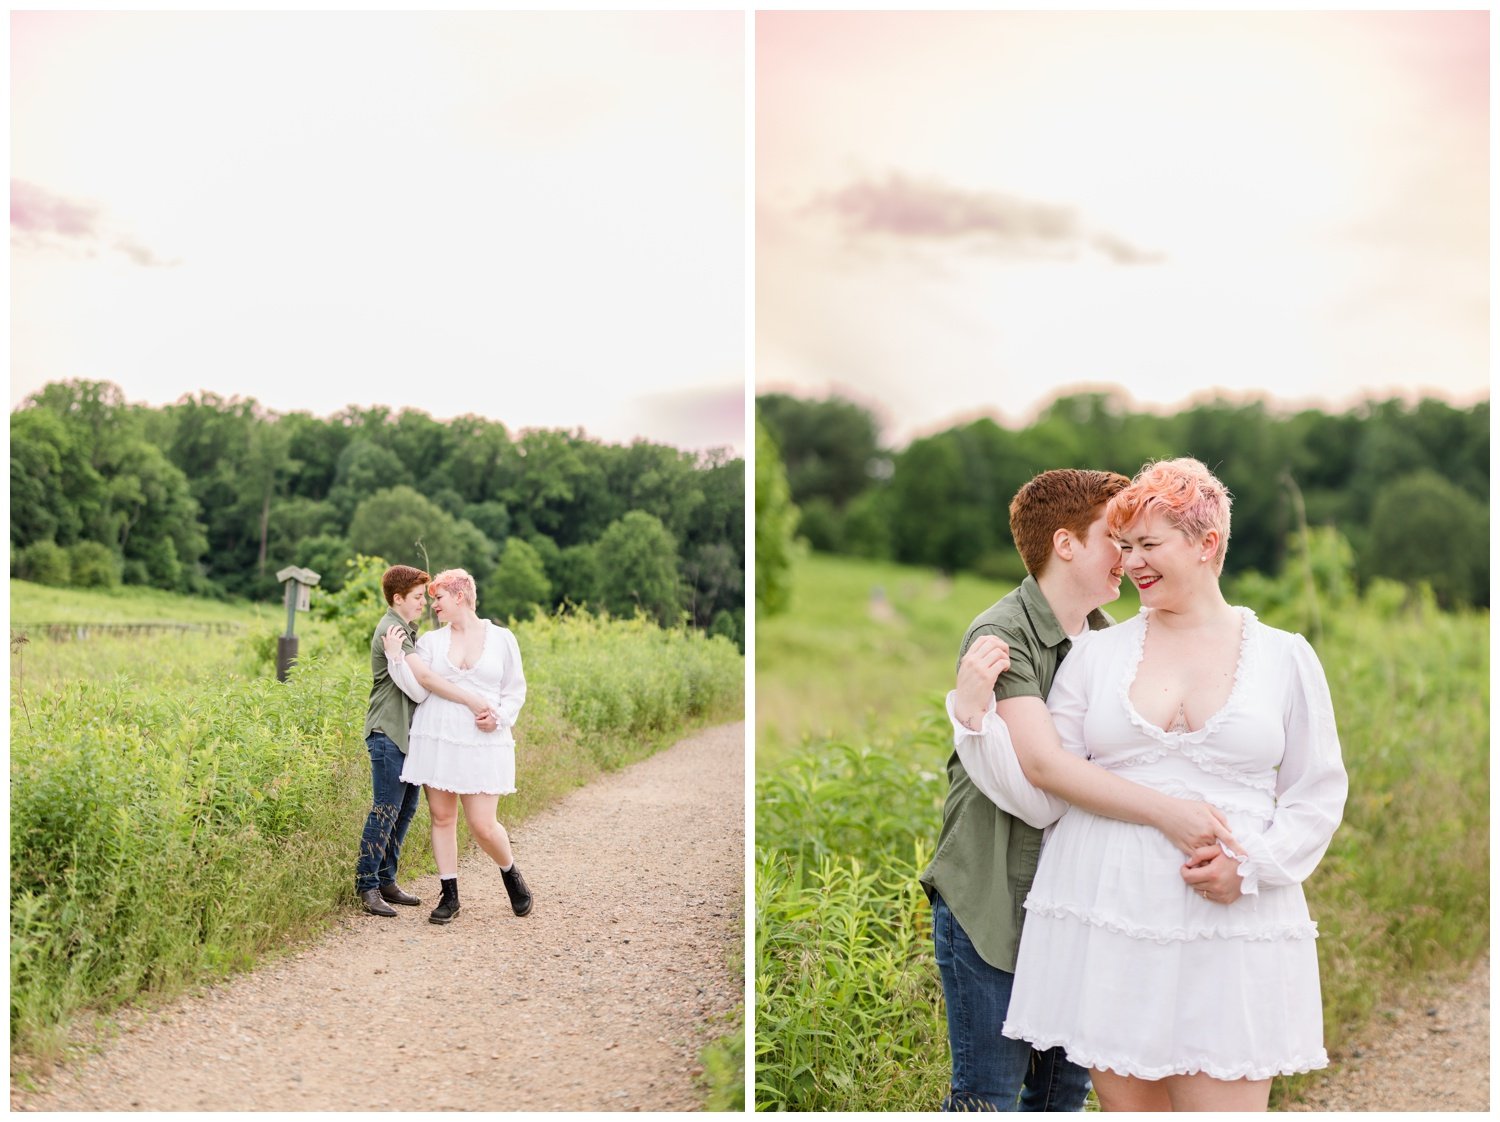 Queer-Engagement-Photos-Longwood-Gardens-Philly-Photographer-LGBTQ-13.jpg